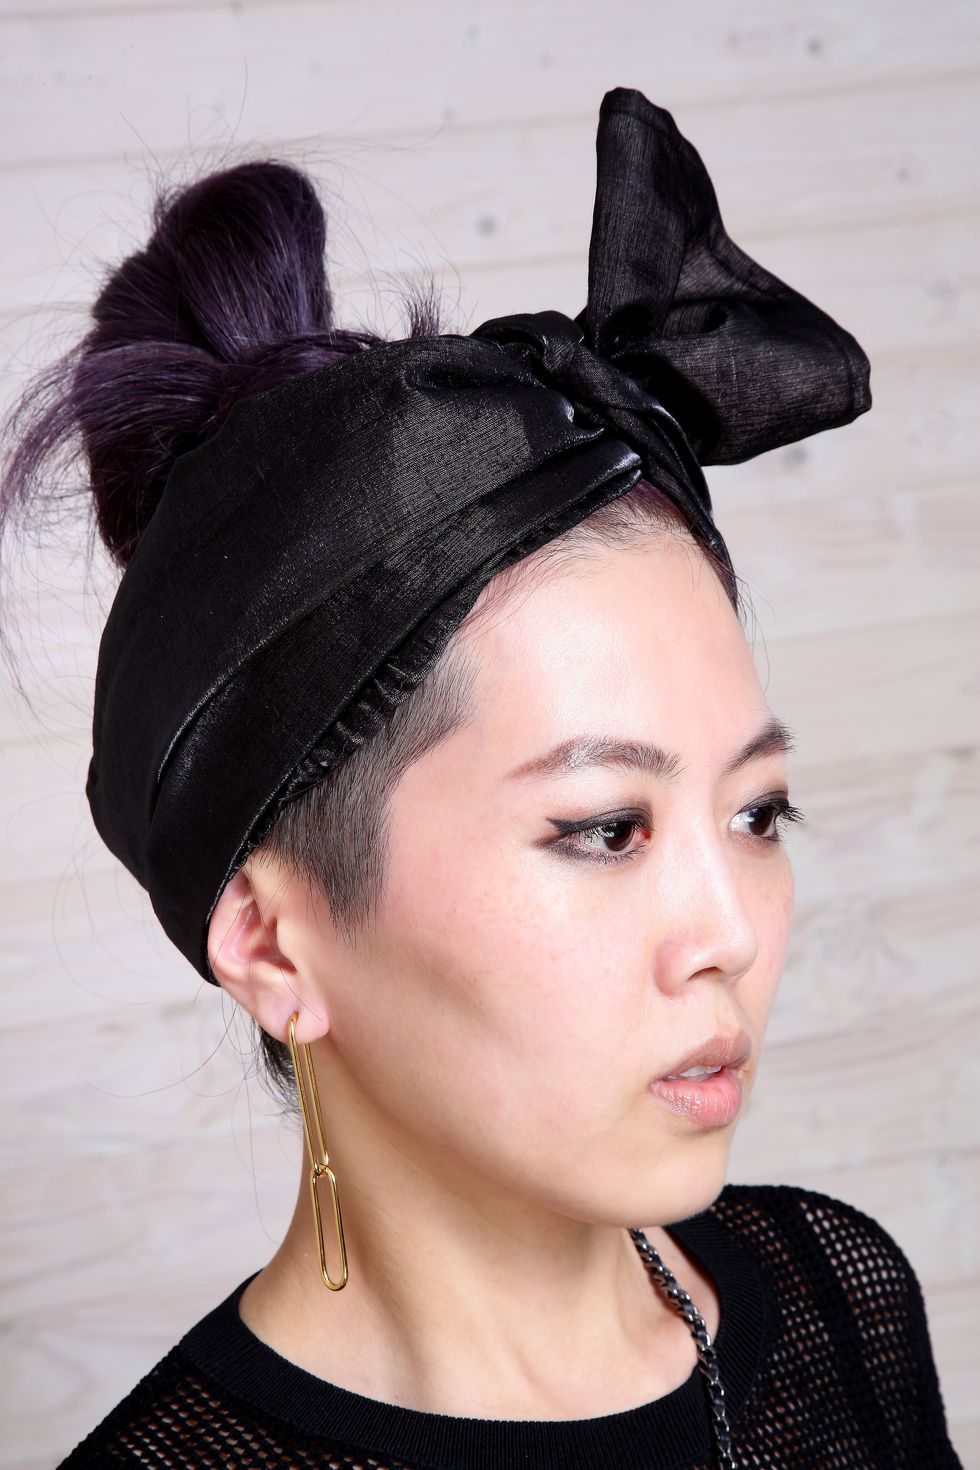 Ear, Nose, Mouth, Hairstyle, Chin, Forehead, Eyebrow, Eyelash, Style, Fashion accessory, 